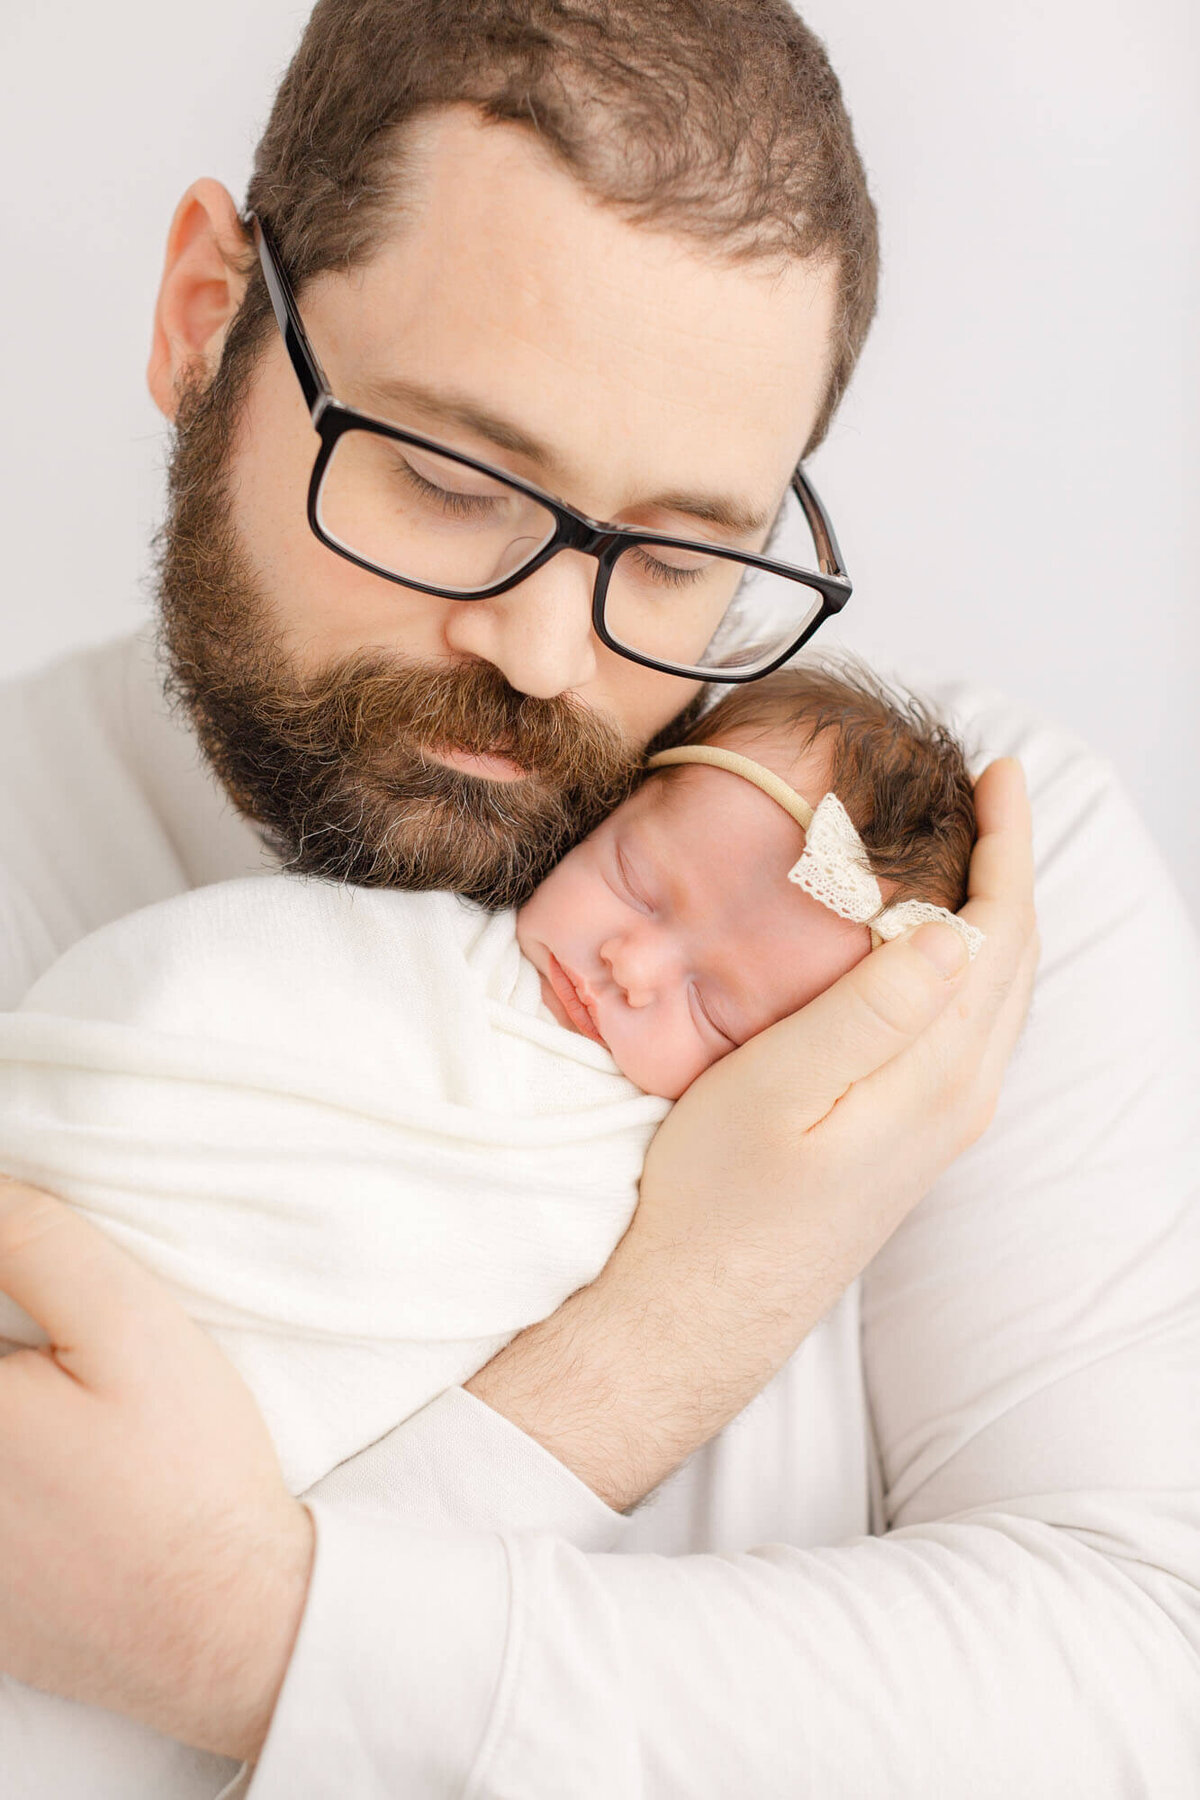 Dad dressed in a white shirt holding baby up to his face, they are cheek-to-cheek. Dad is wearing black glasses and his eyes are closed. Baby is sleeping peacefully.